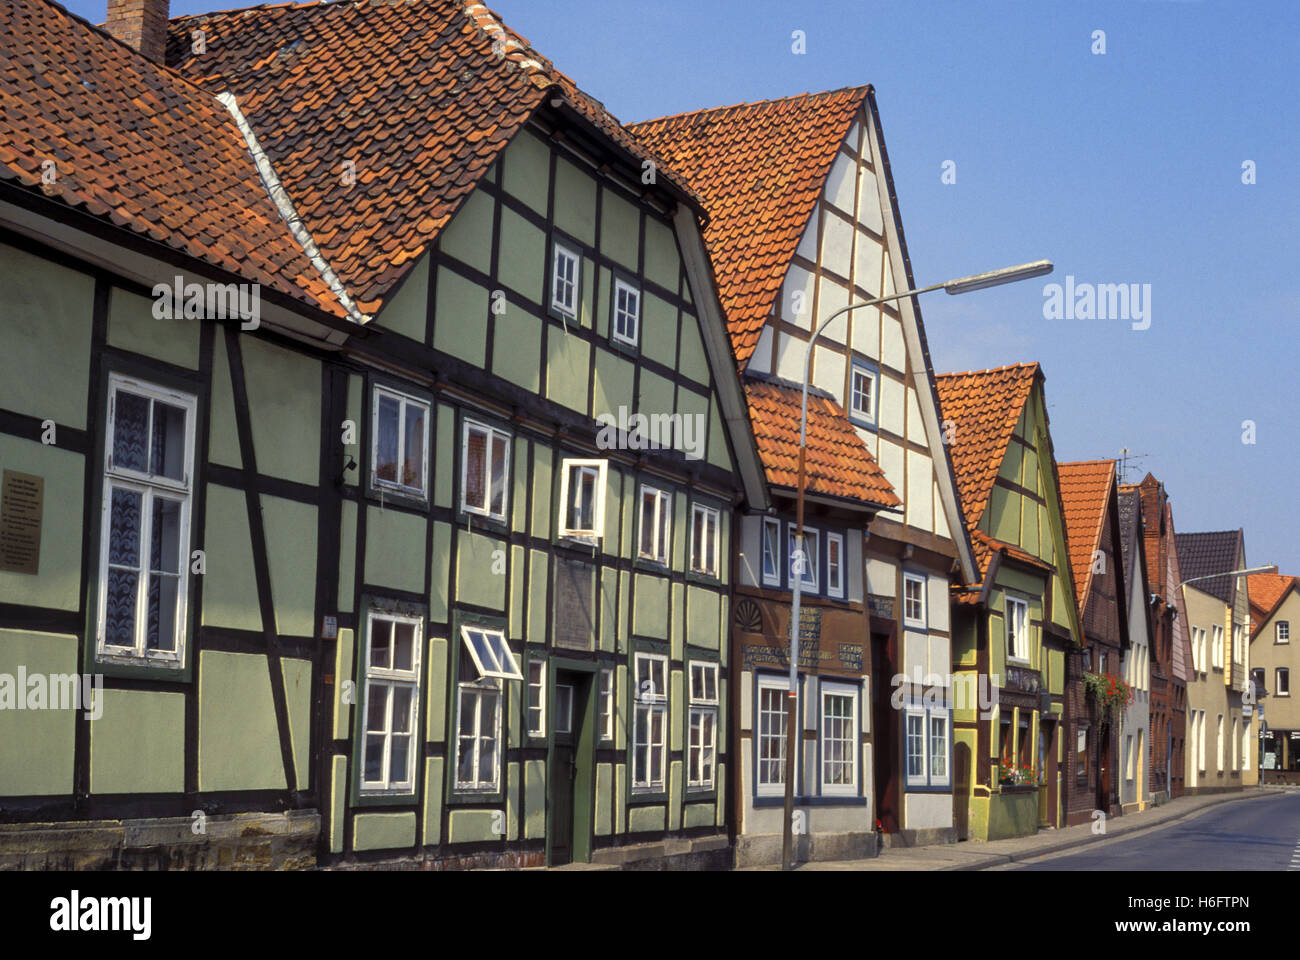 Germany, Lower Saxony, Hessisch Oldendorf, houses at the old part of town. Stock Photo